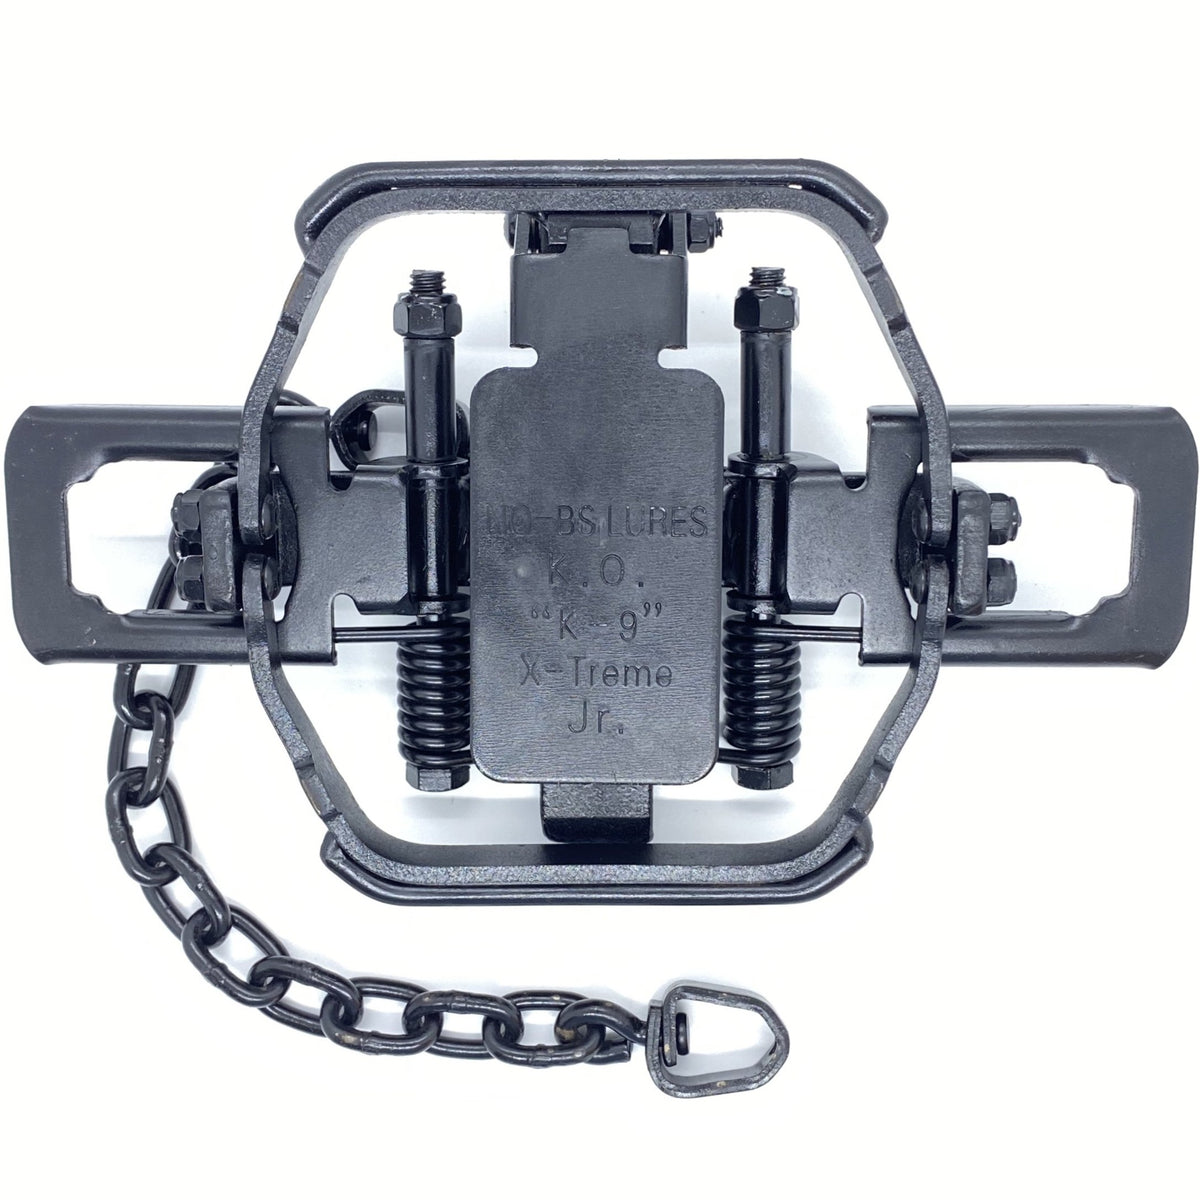 NO-BS K9 Extreme Jr. Trap - 2 Coil Offset Jaw – TrapShed Supply Co.